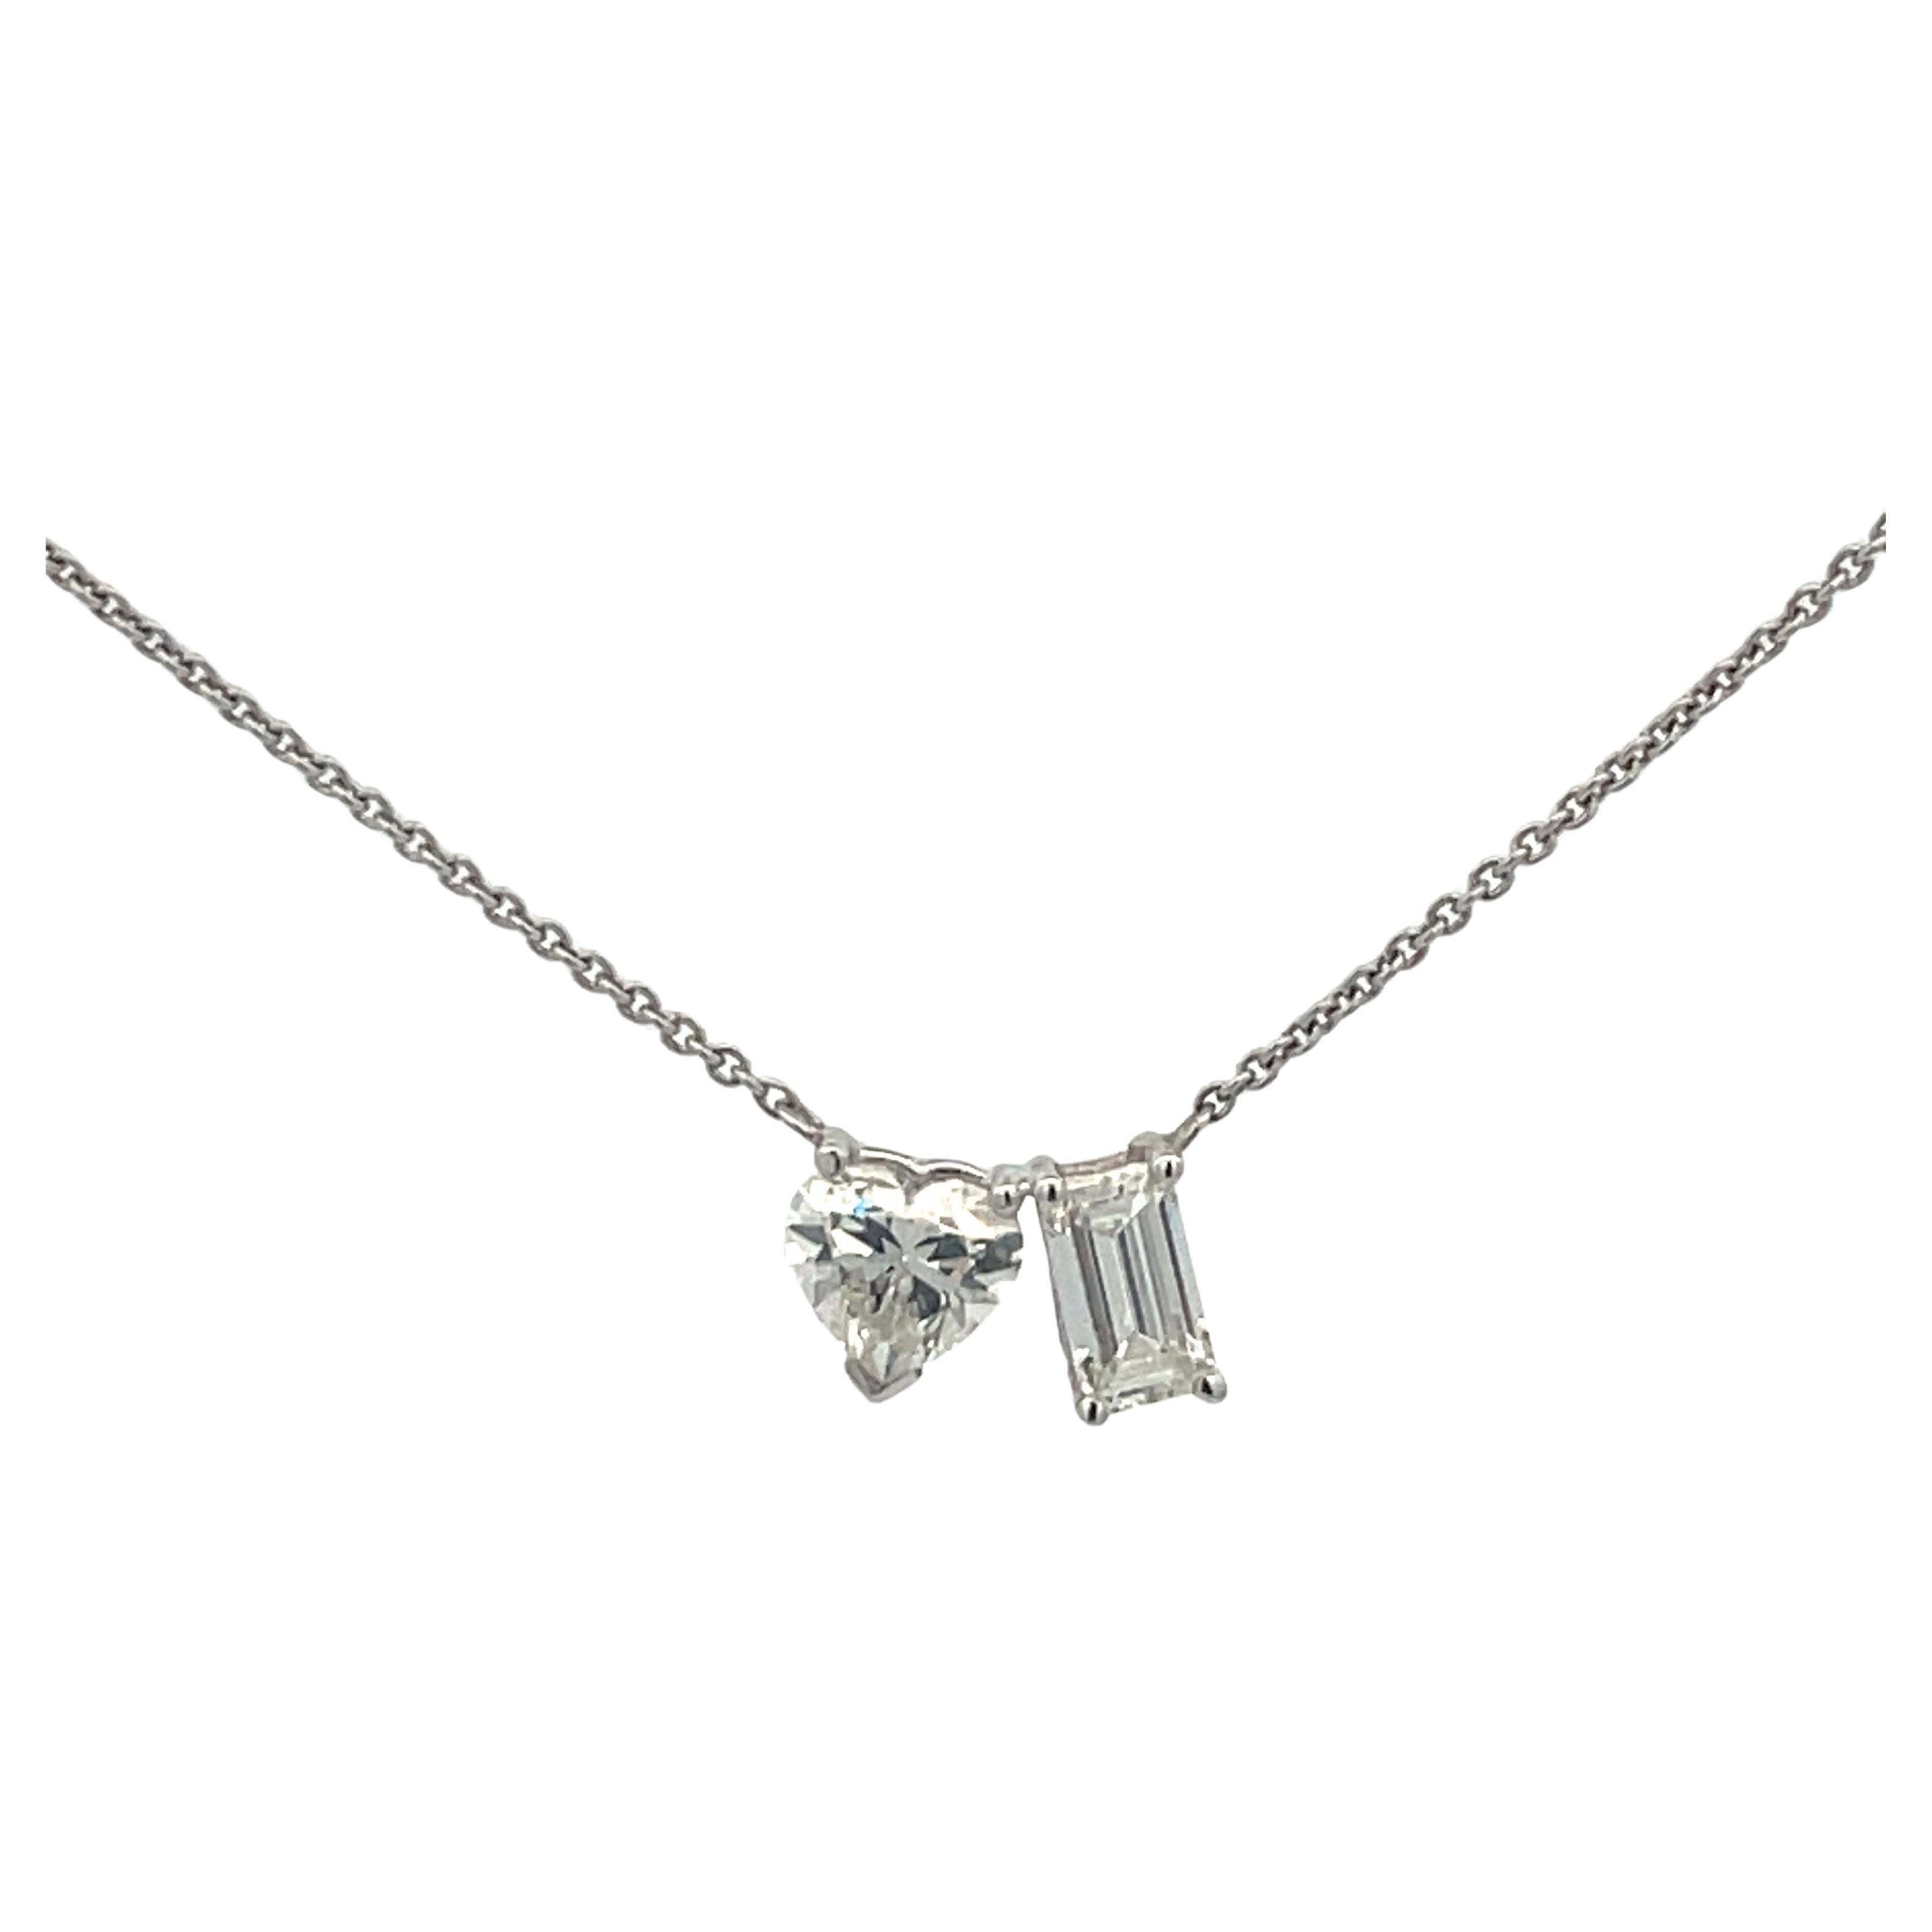 Moi Et Toi pendant necklace featuring GIA Certified stones, one Heart shape diamond, 0.80 Carats G SI2, and one Emerald Cut Diamond, 0.61 Carats G VS2, in 14 Karat White Gold. 